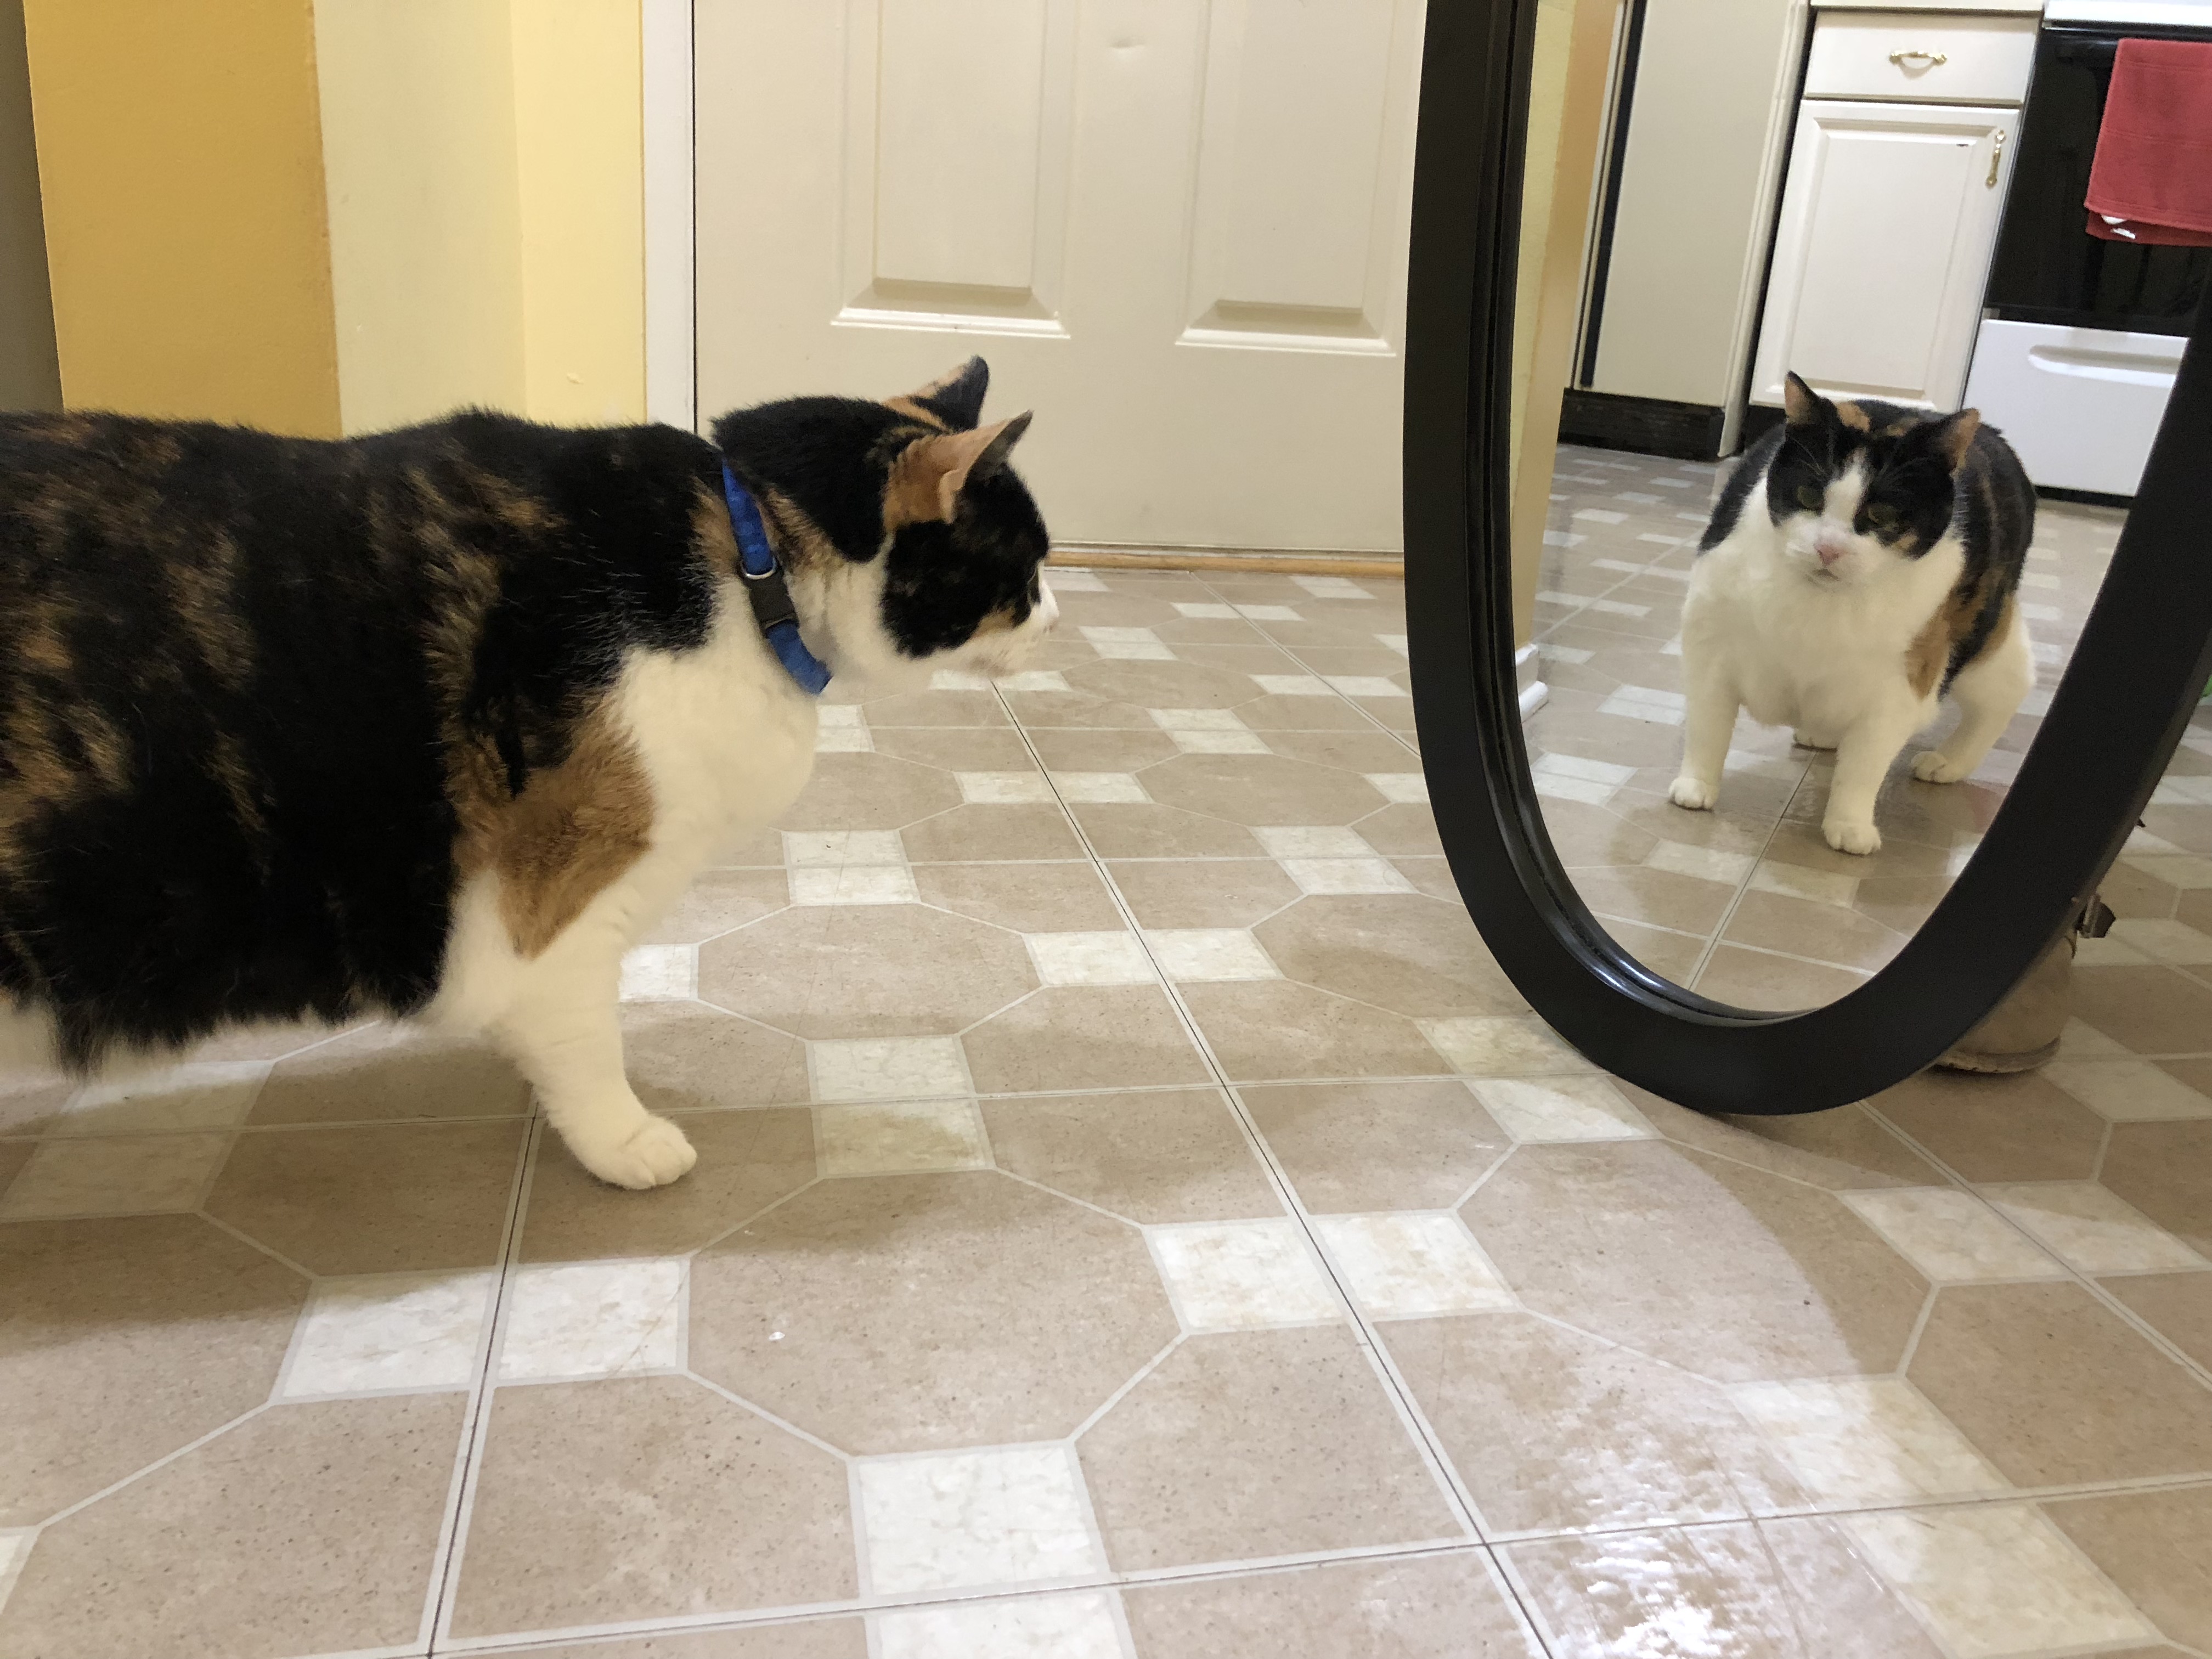 File:2020-01-19 18 05 20 A Calico cat reacting to a mirror in the Franklin  Farm section of Oak Hill, Fairfax County, Virginia.jpg - Wikimedia Commons